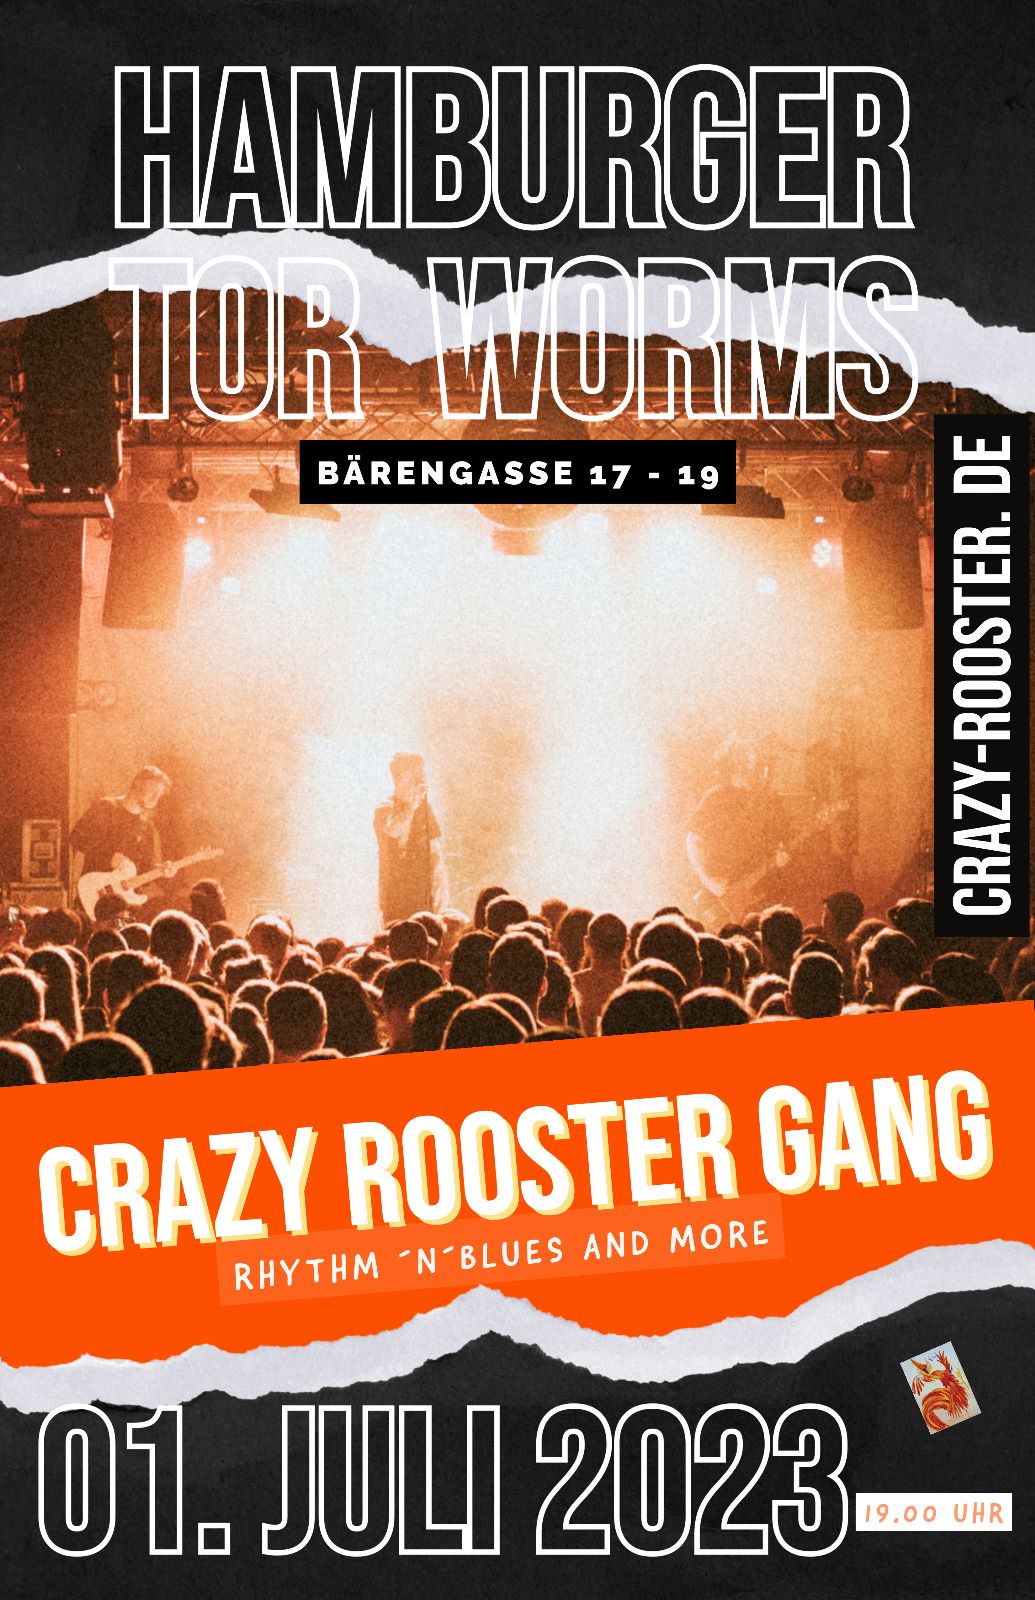 Crazy Rooster Gang Rythm’n Blues & more